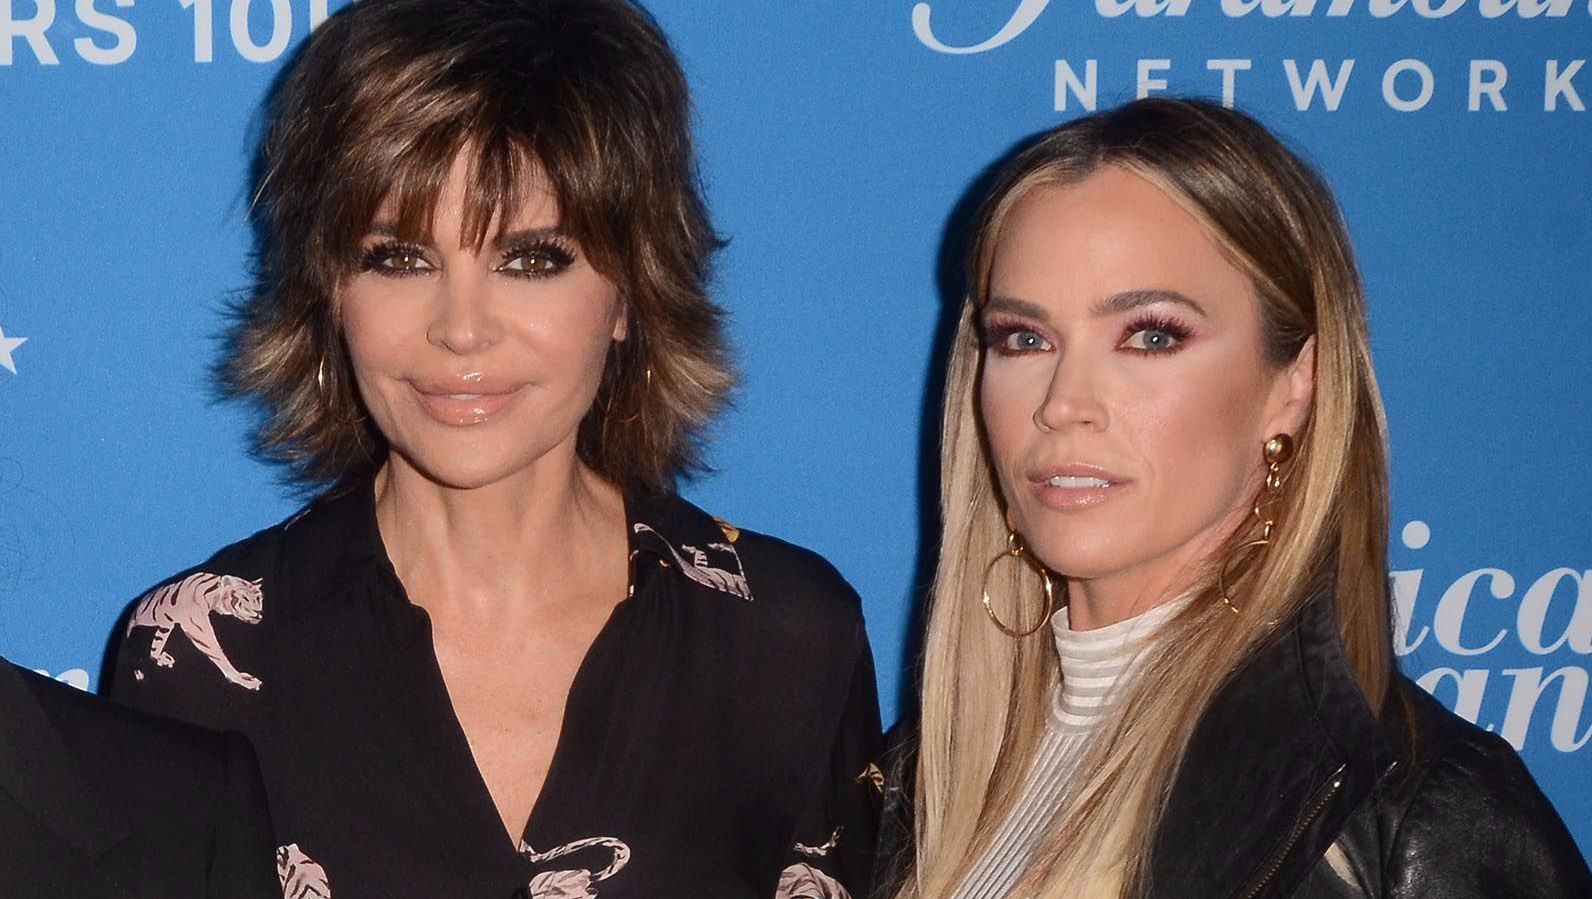 Lisa Rinna wears a tiger blouse with Teddi Mellencamp in a nude turtleneck.